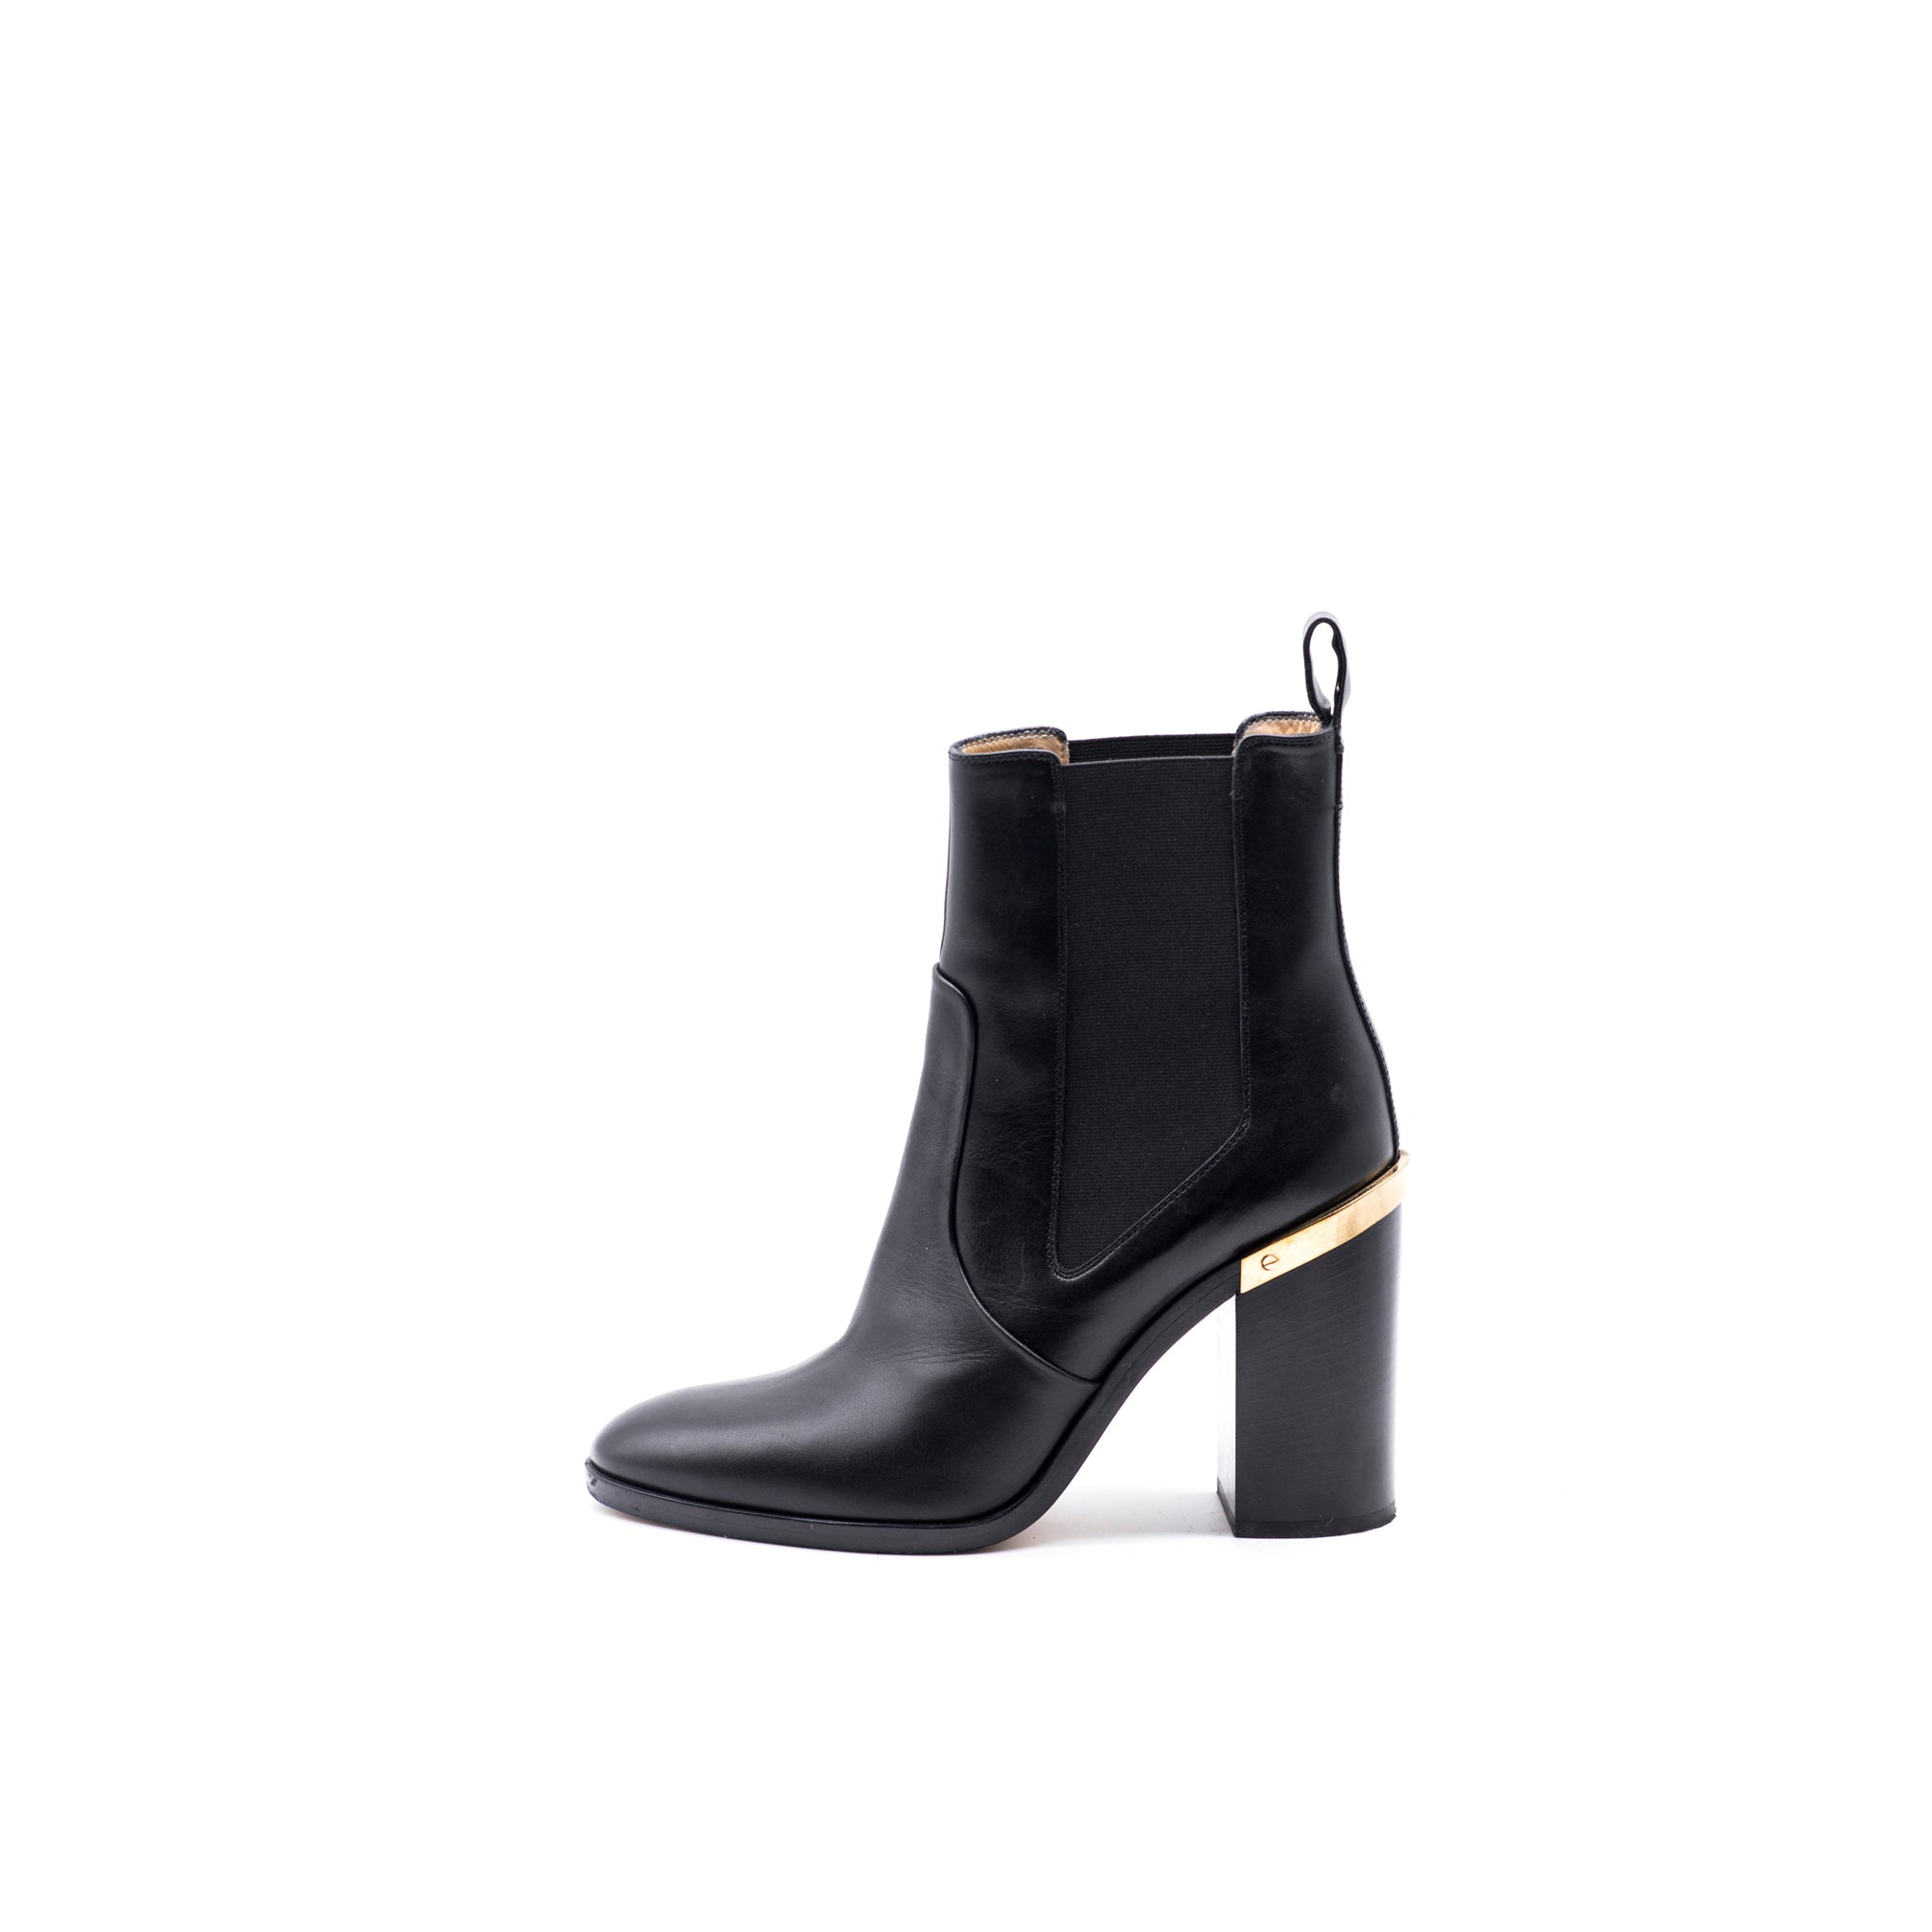 chelsea boots with gold trim